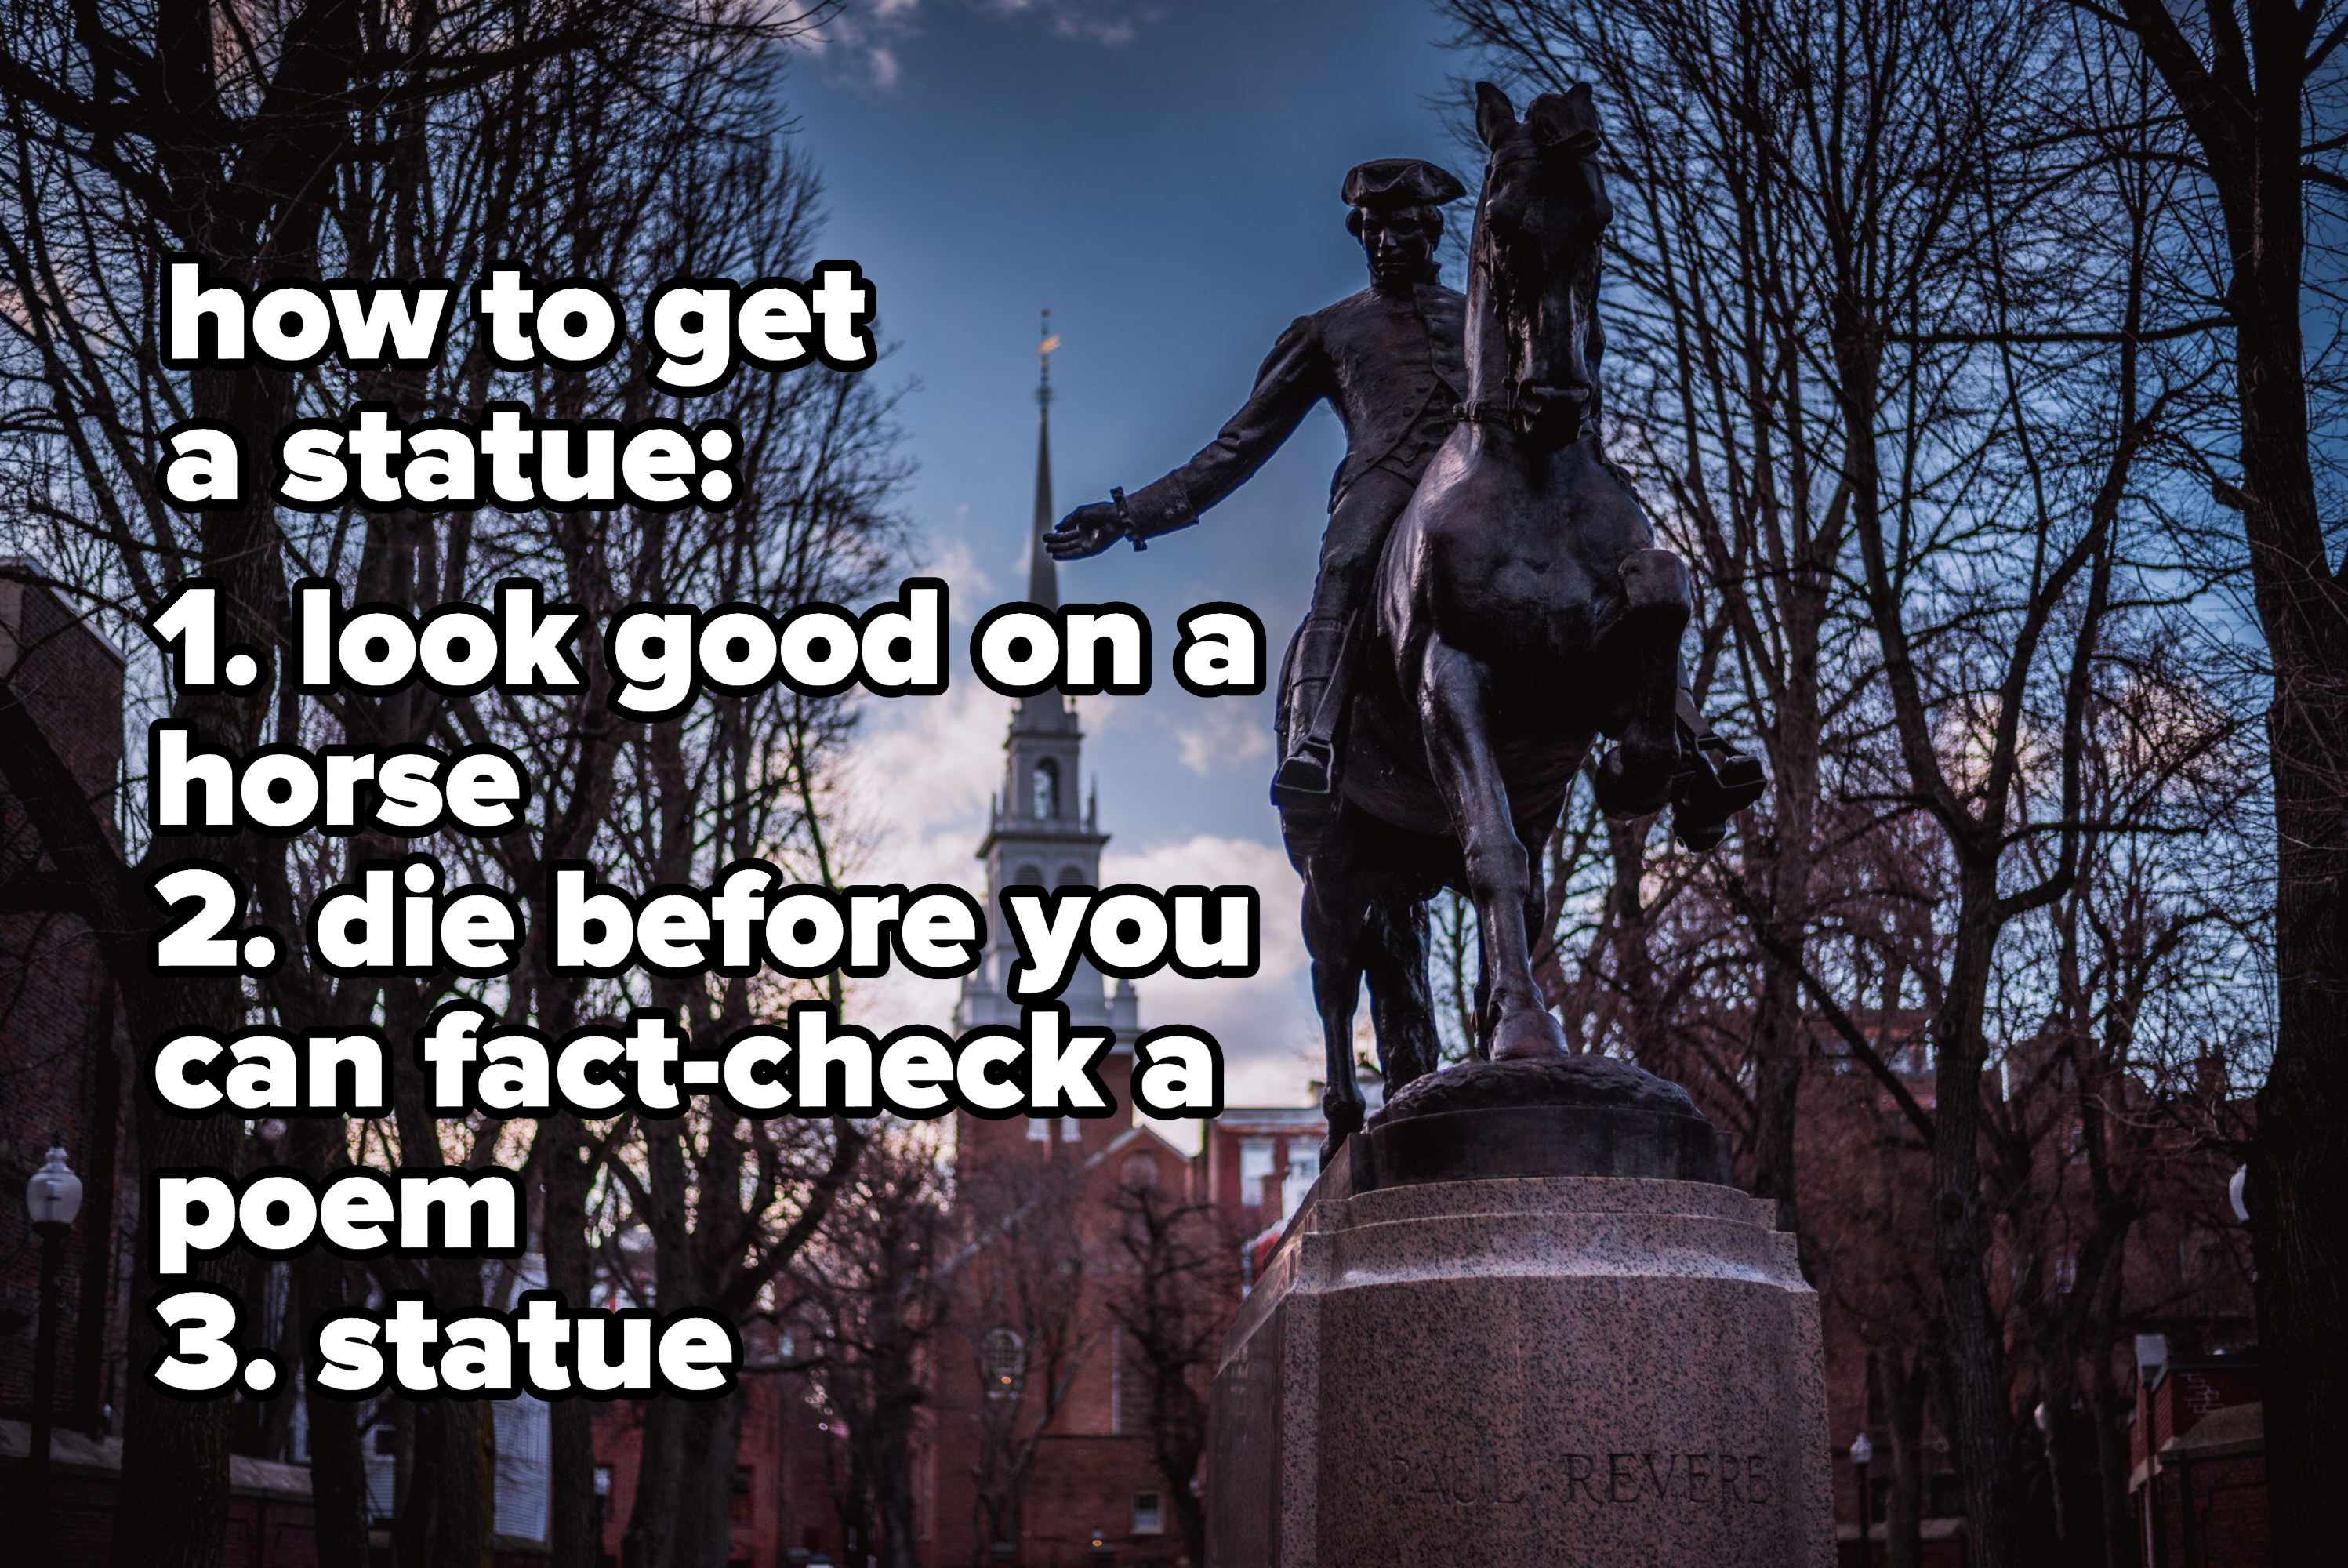 a Paul Revere monument in Boston, with caption: how to get a statue 1. look good on a horse 2. die before you can fact-check a poem 3. statue